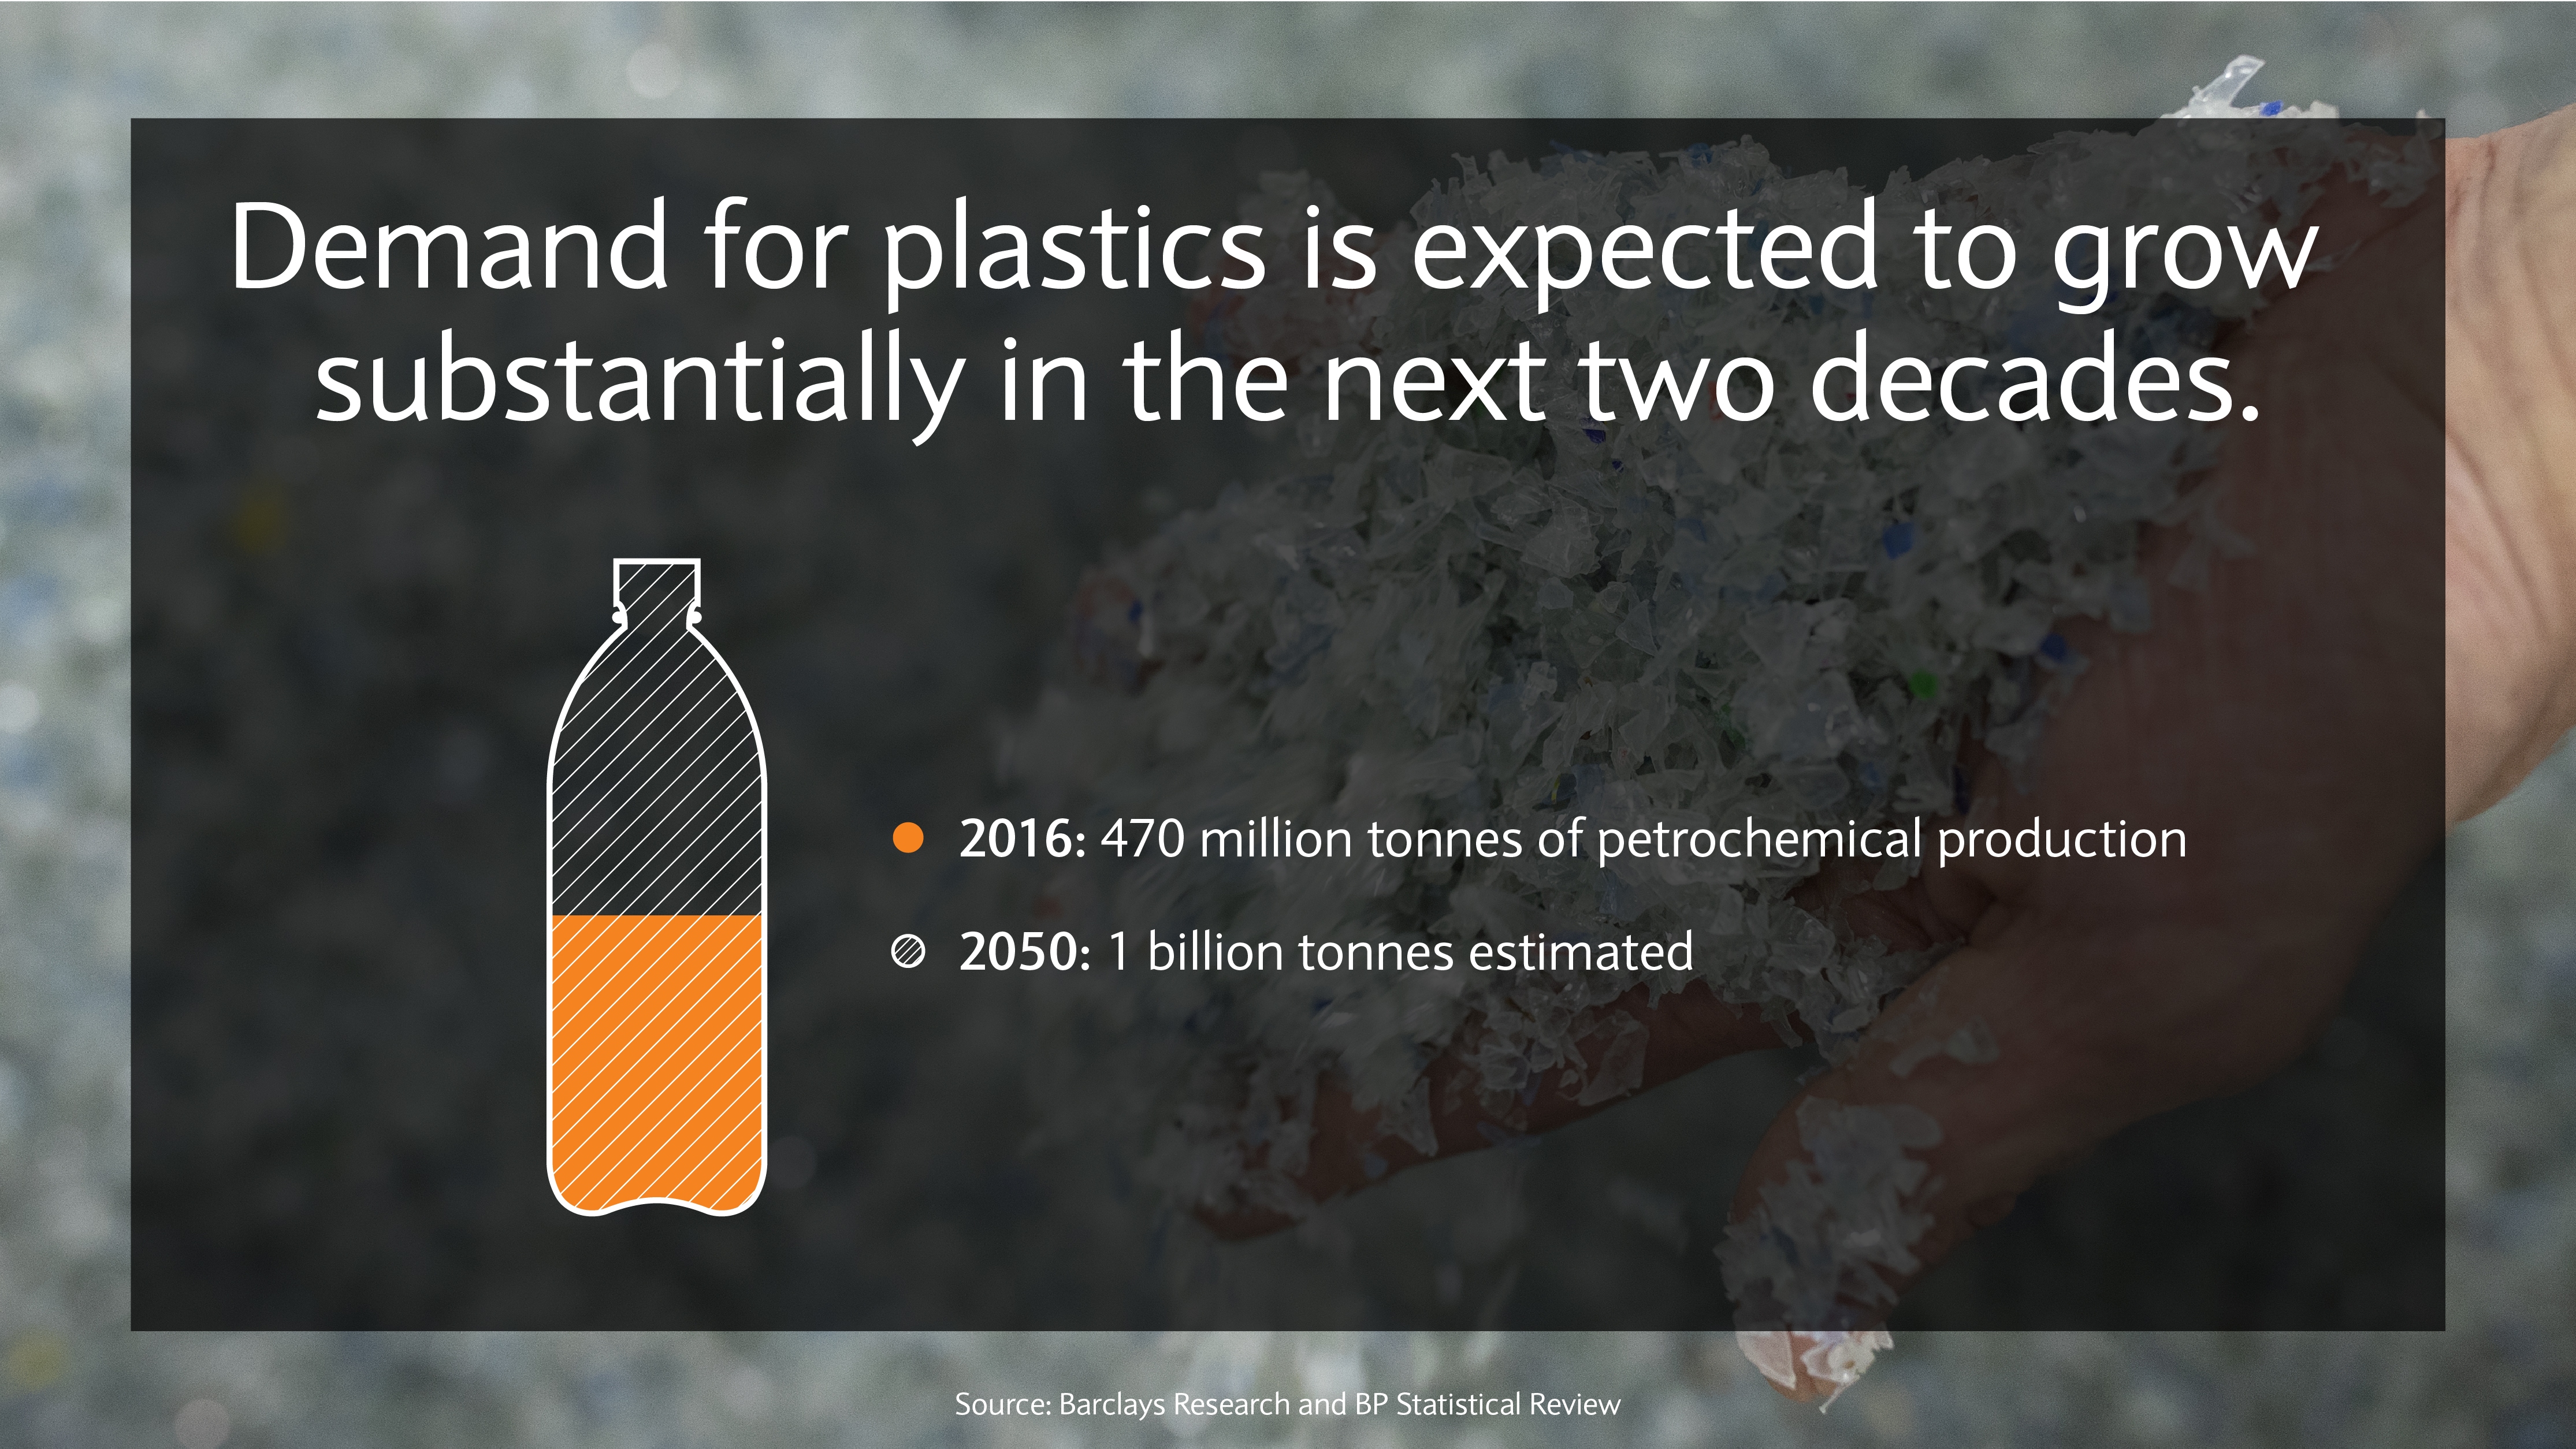 Demand for plastics is expected to grow substantially in the next two decades